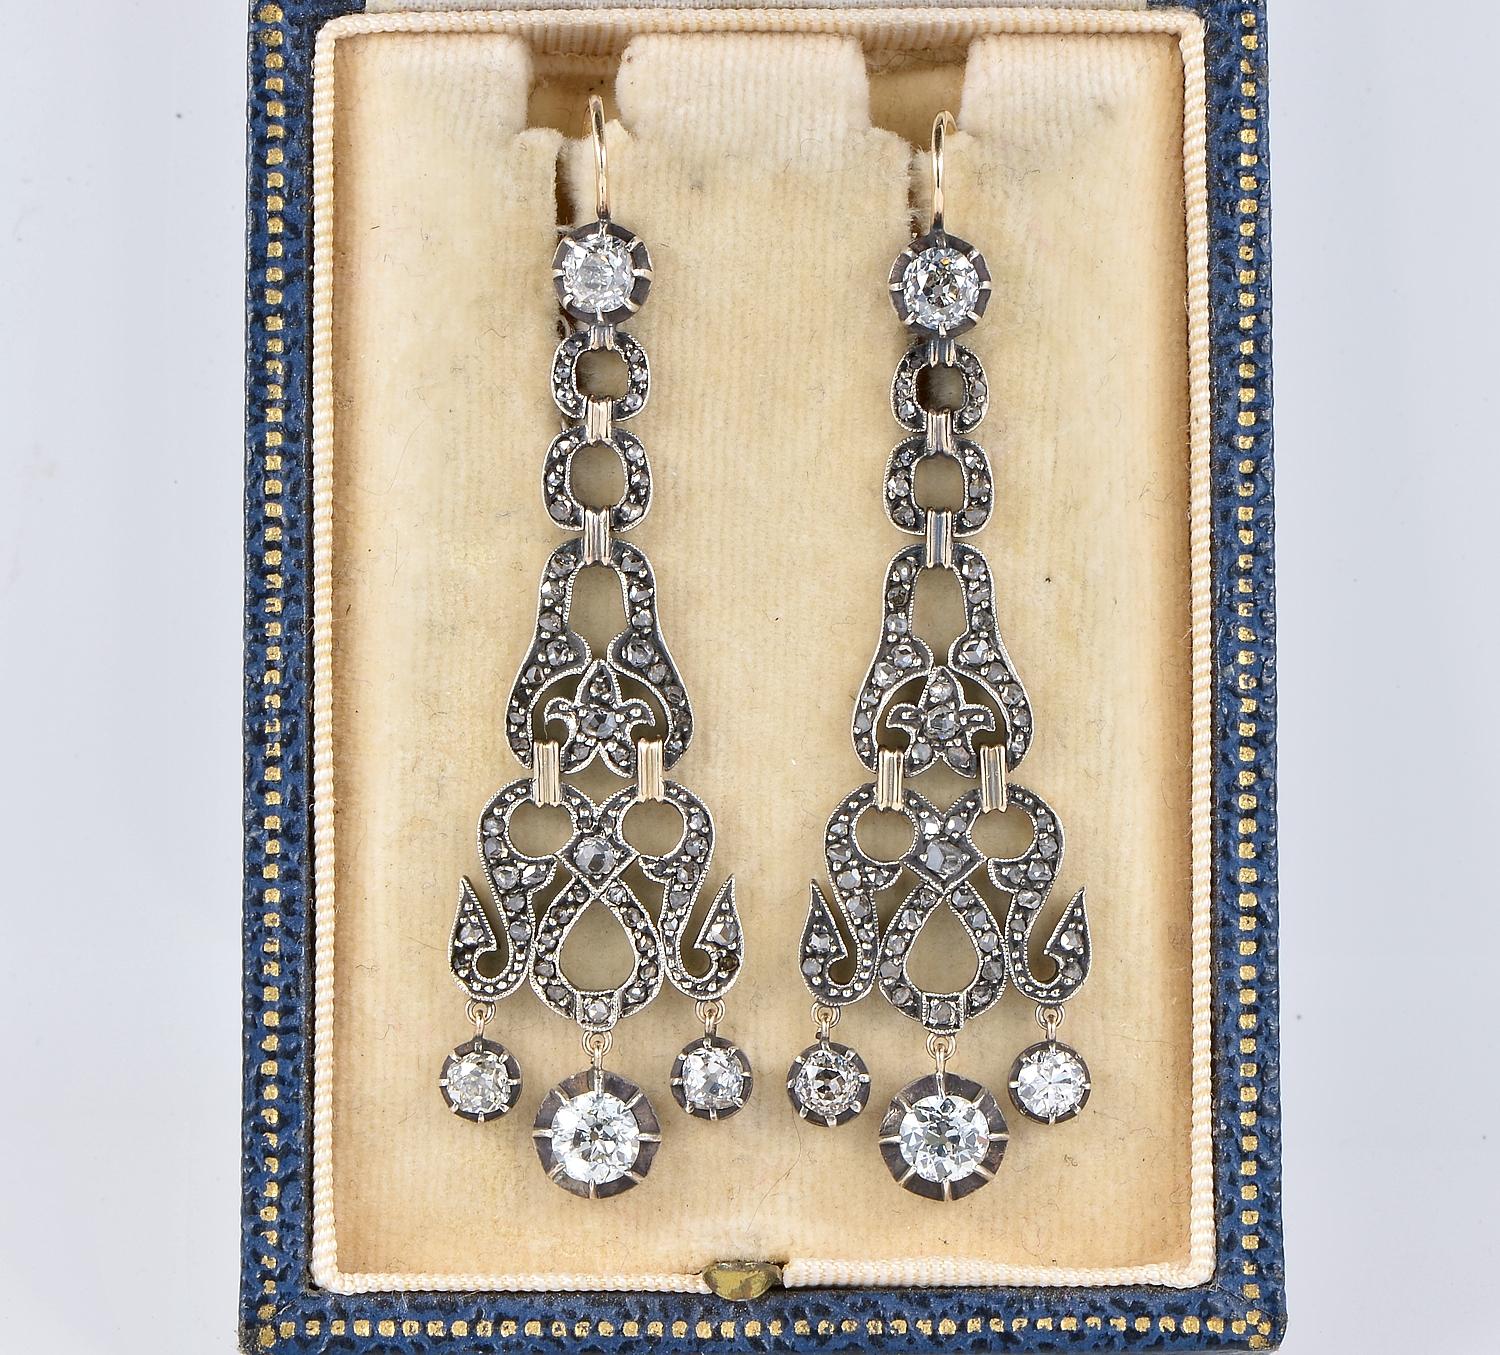 A Ravishing pair of Georgian period Diamond earrings, beautiful articulated workmanship, artful rendered from 18 KT rose gold topped by silver – 1820 ca
Intricate openwork enhanced by lots of Rose cut Diamonds
A solitaire Diamond set on the top and